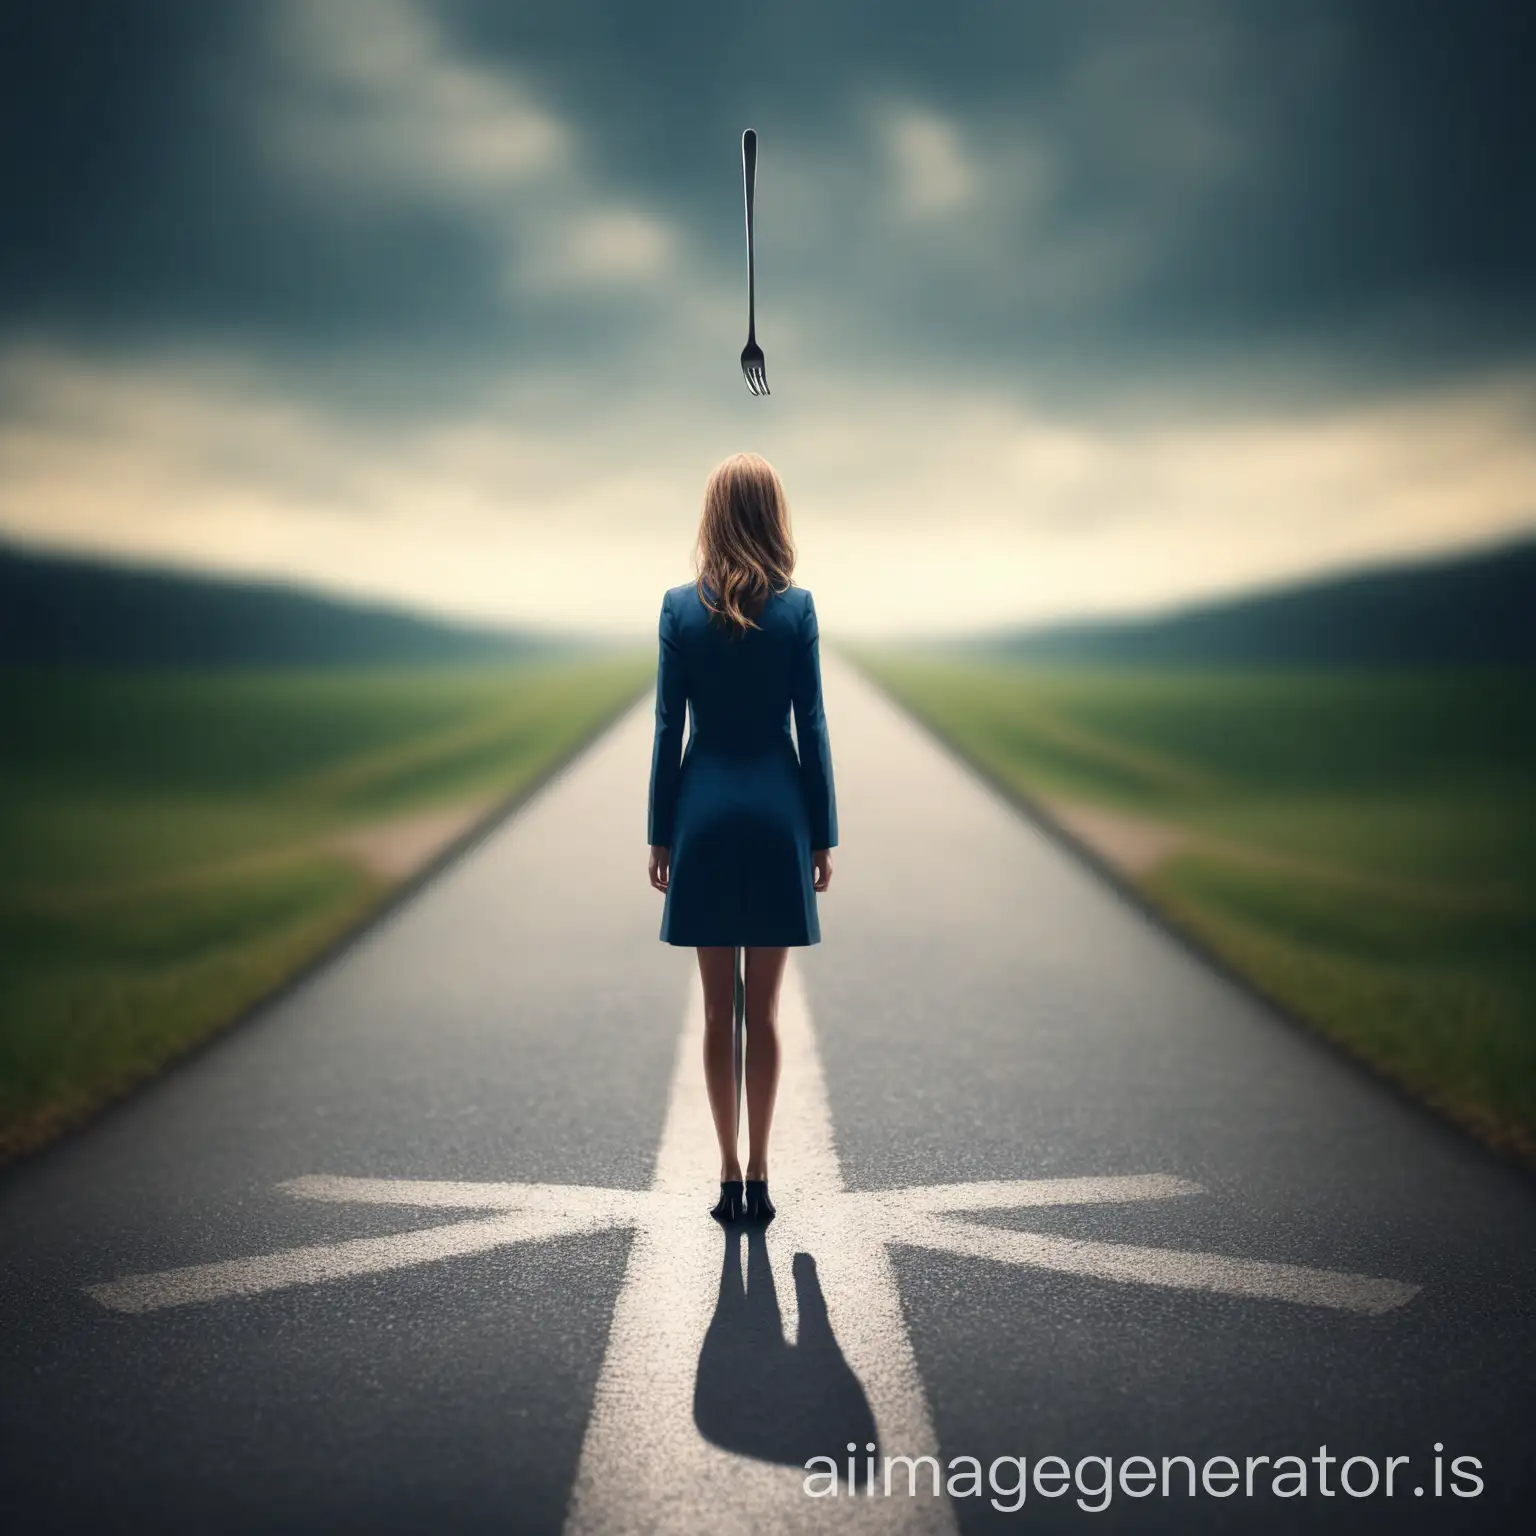 She is standing at a fork in the road, looking into the distance, where two paths lead to different directions, symbolizing a turning point in career choices, with a blurry background that highlights the character's confusion and longing for the future.